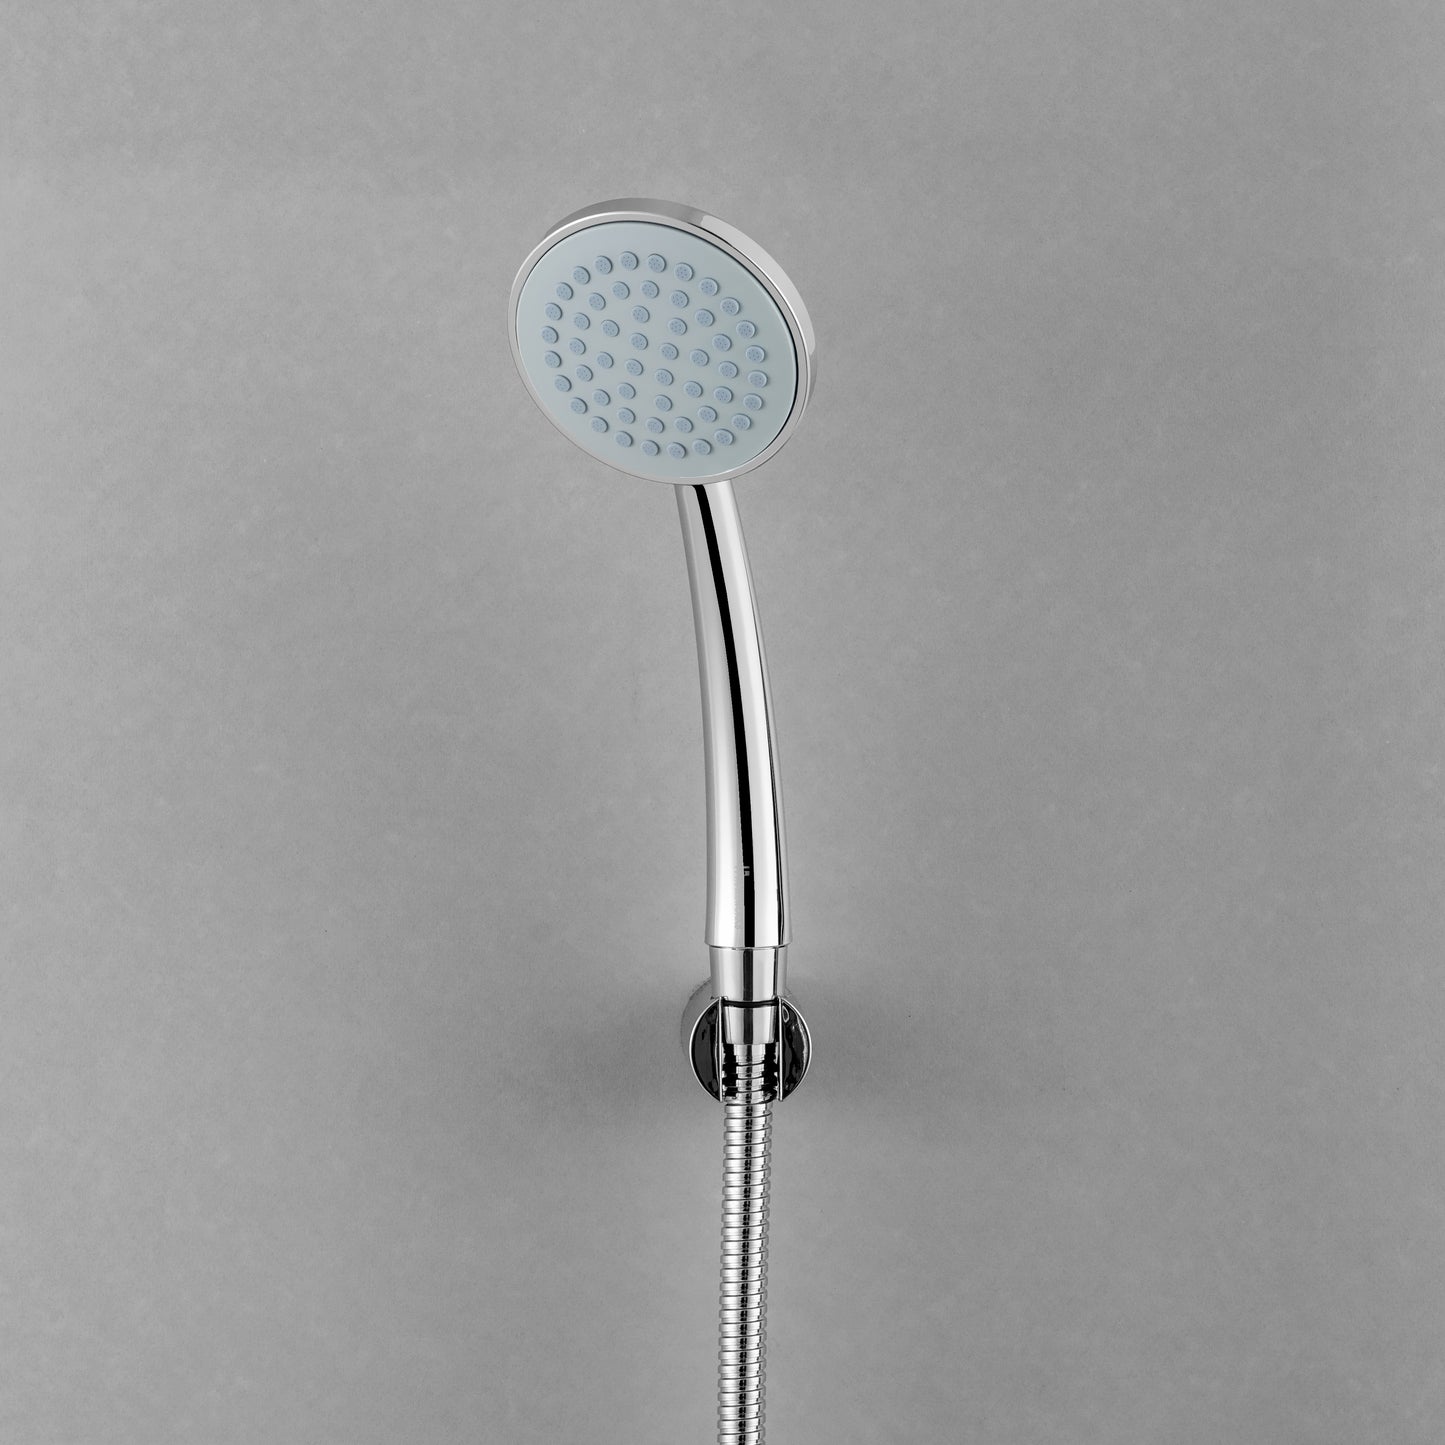 TELEPHONE SHOWER SET RADO ABS CHROME FINISH WITH 1.5 METER SS PULLOUT SHOWER TUBE AND ABS WALL HOOK